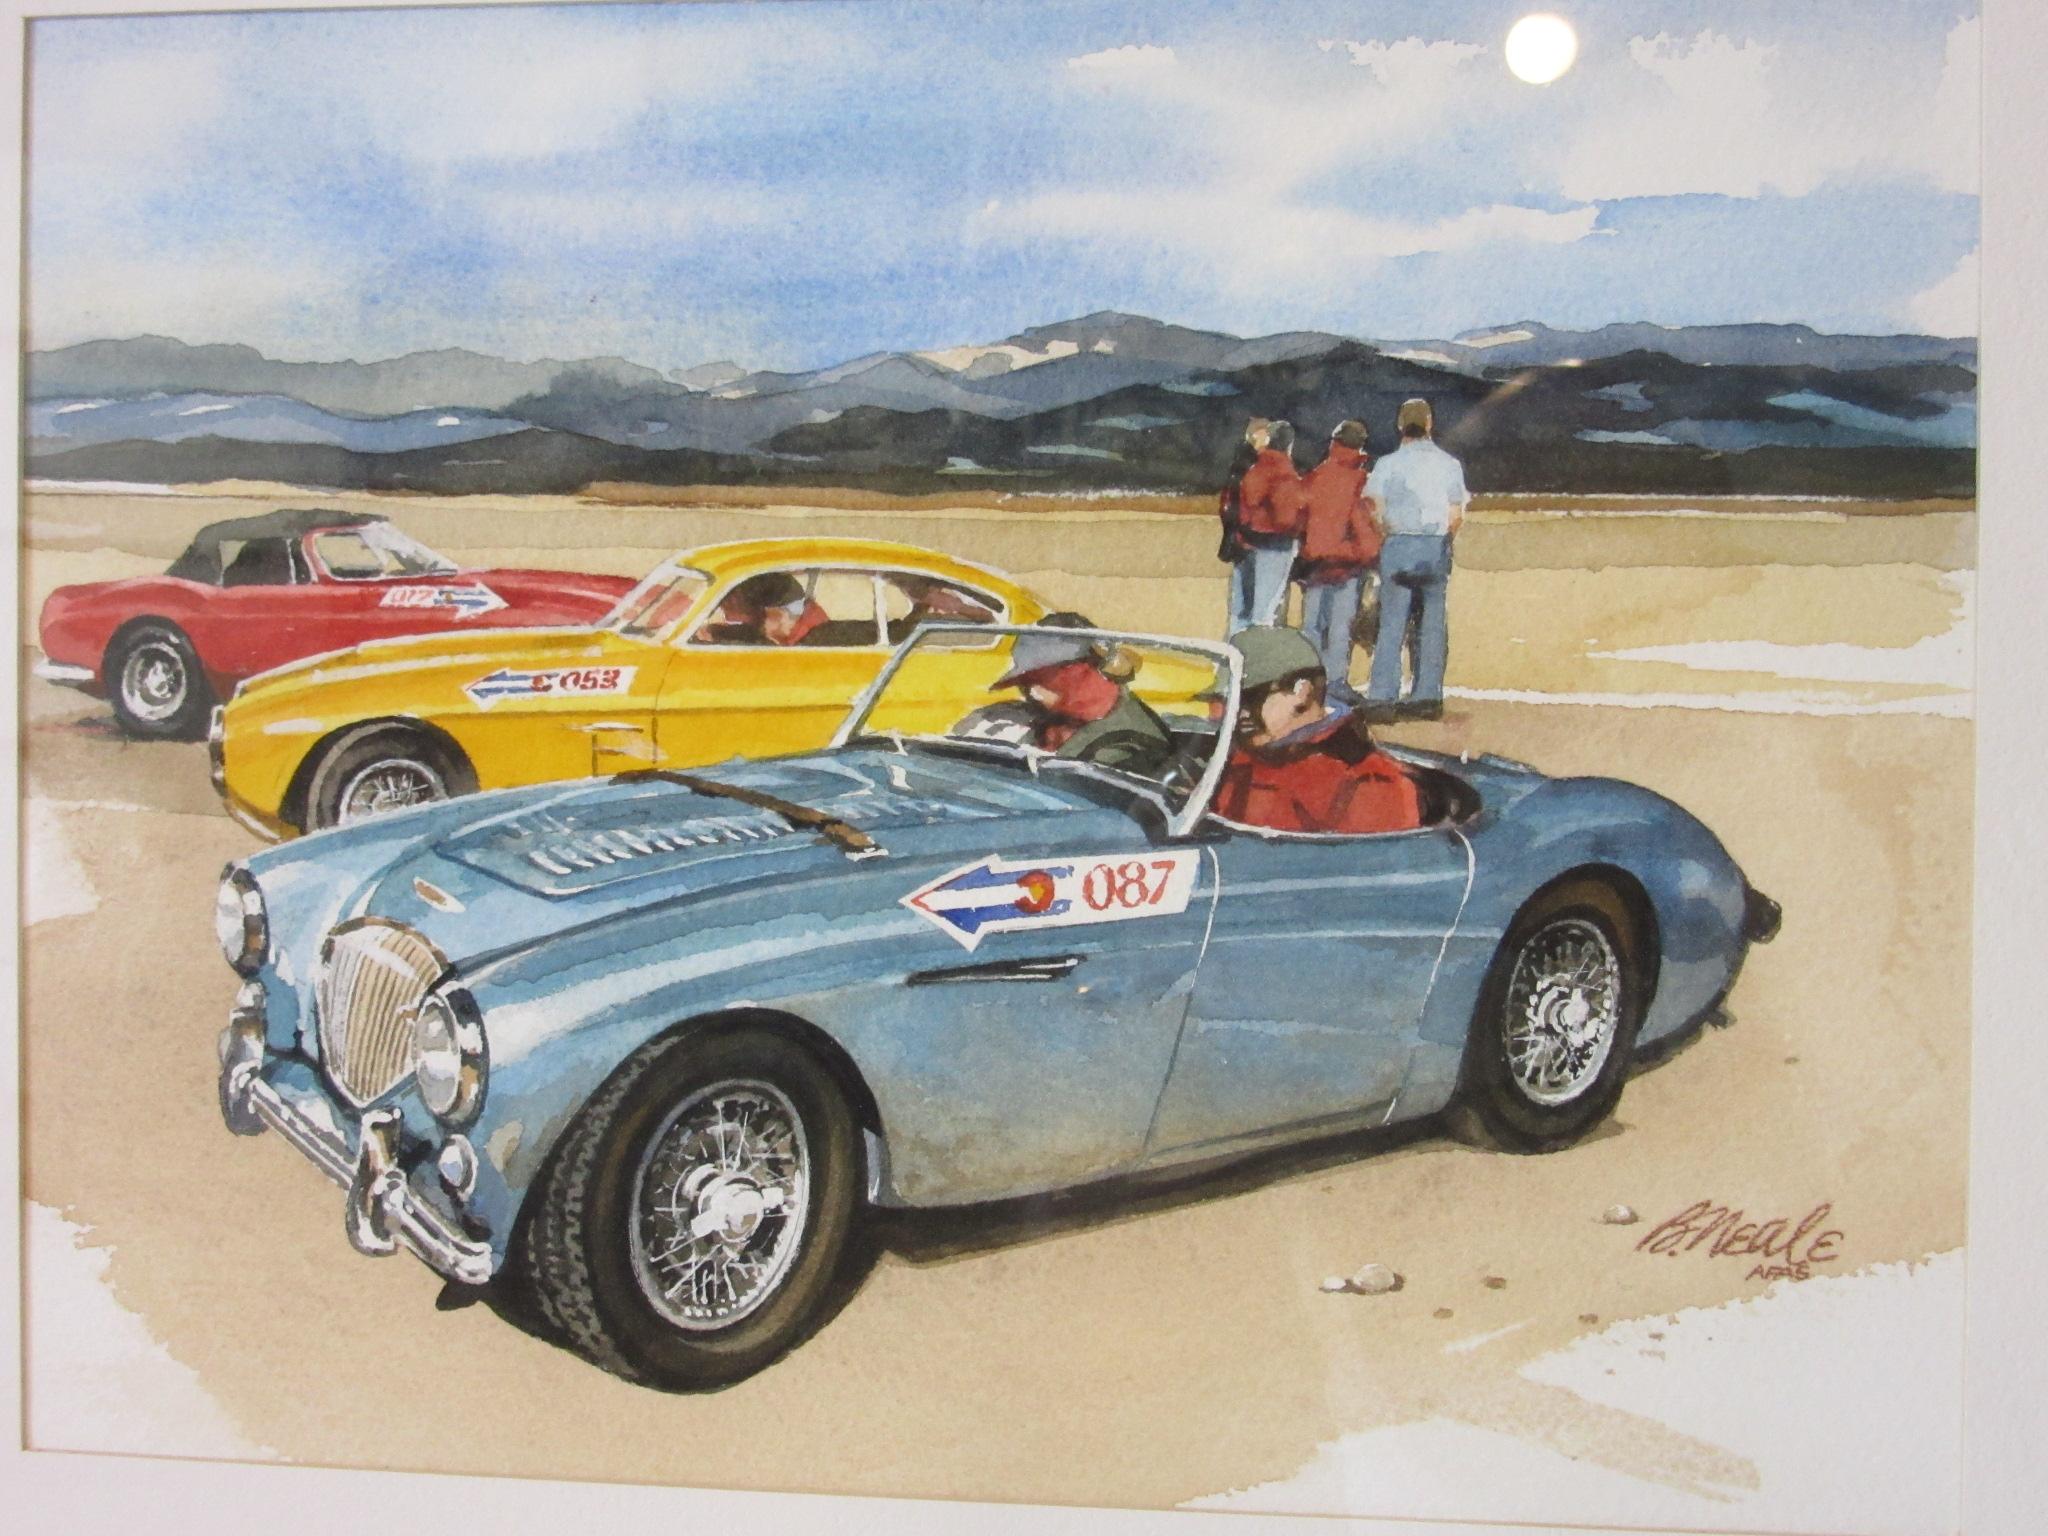 A fine art original automotive watercolor by the acclaimed Bill Neale who's works covered racing, historic cars and scenes from the drivers prospective. Bill's work has been featured in publications like Road & Track, Car & Driver, Cavalino magazine